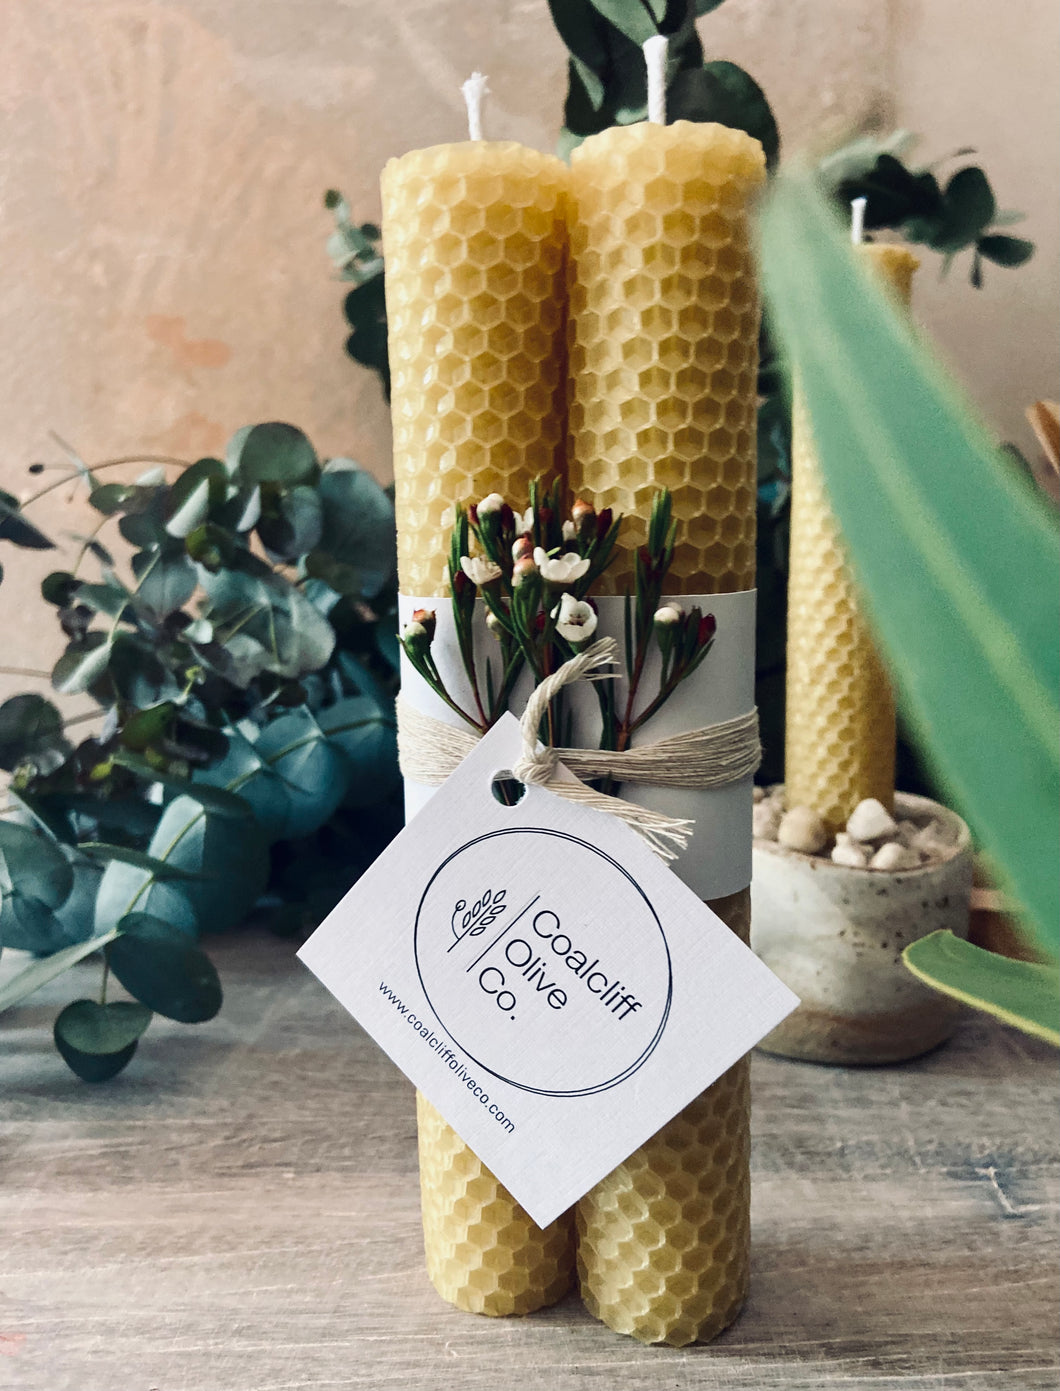 Hand rolled Bees wax pillar candles 2 pieces